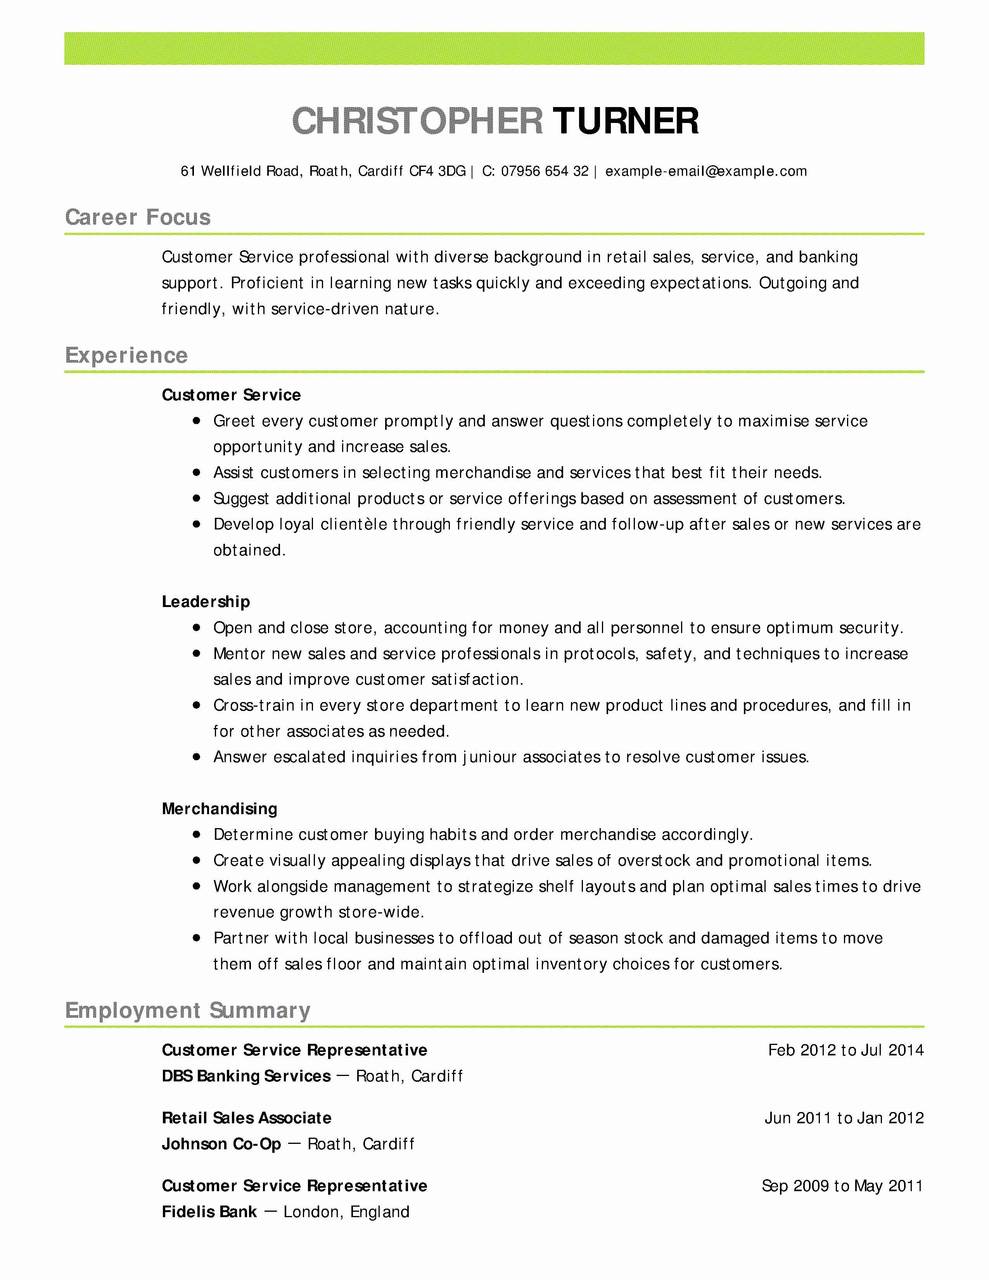 resume templates for customer service representatives examples of